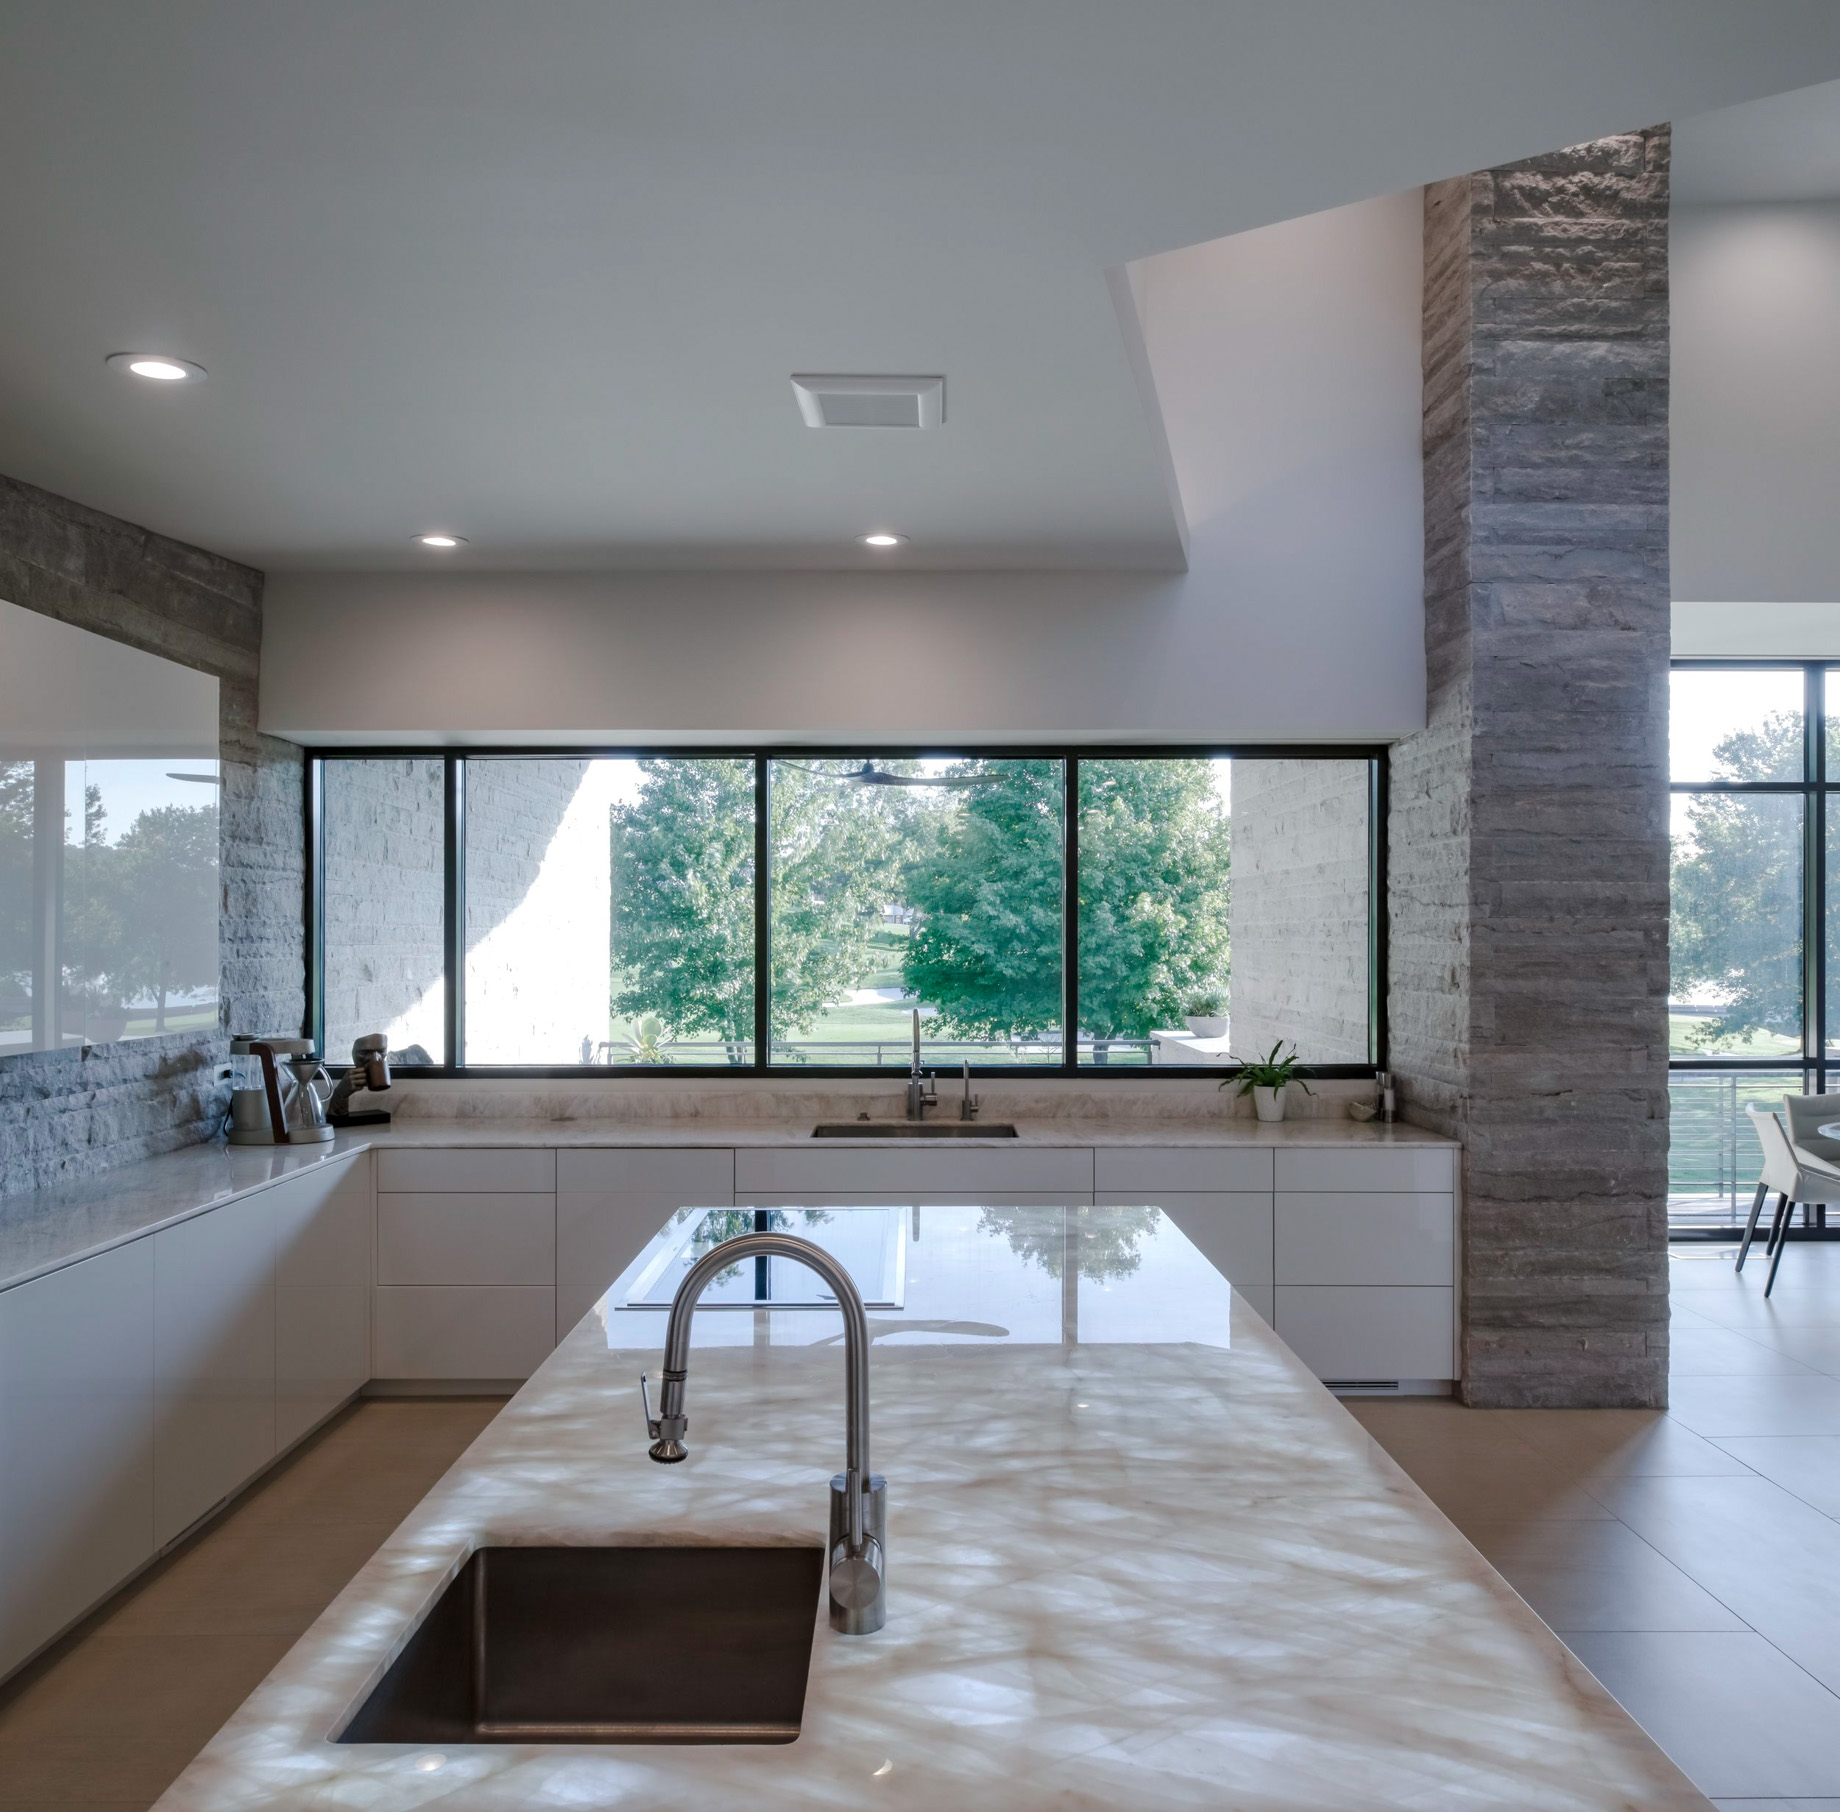 Glade Responsive Architecture Residence – Springfield, MO, USA